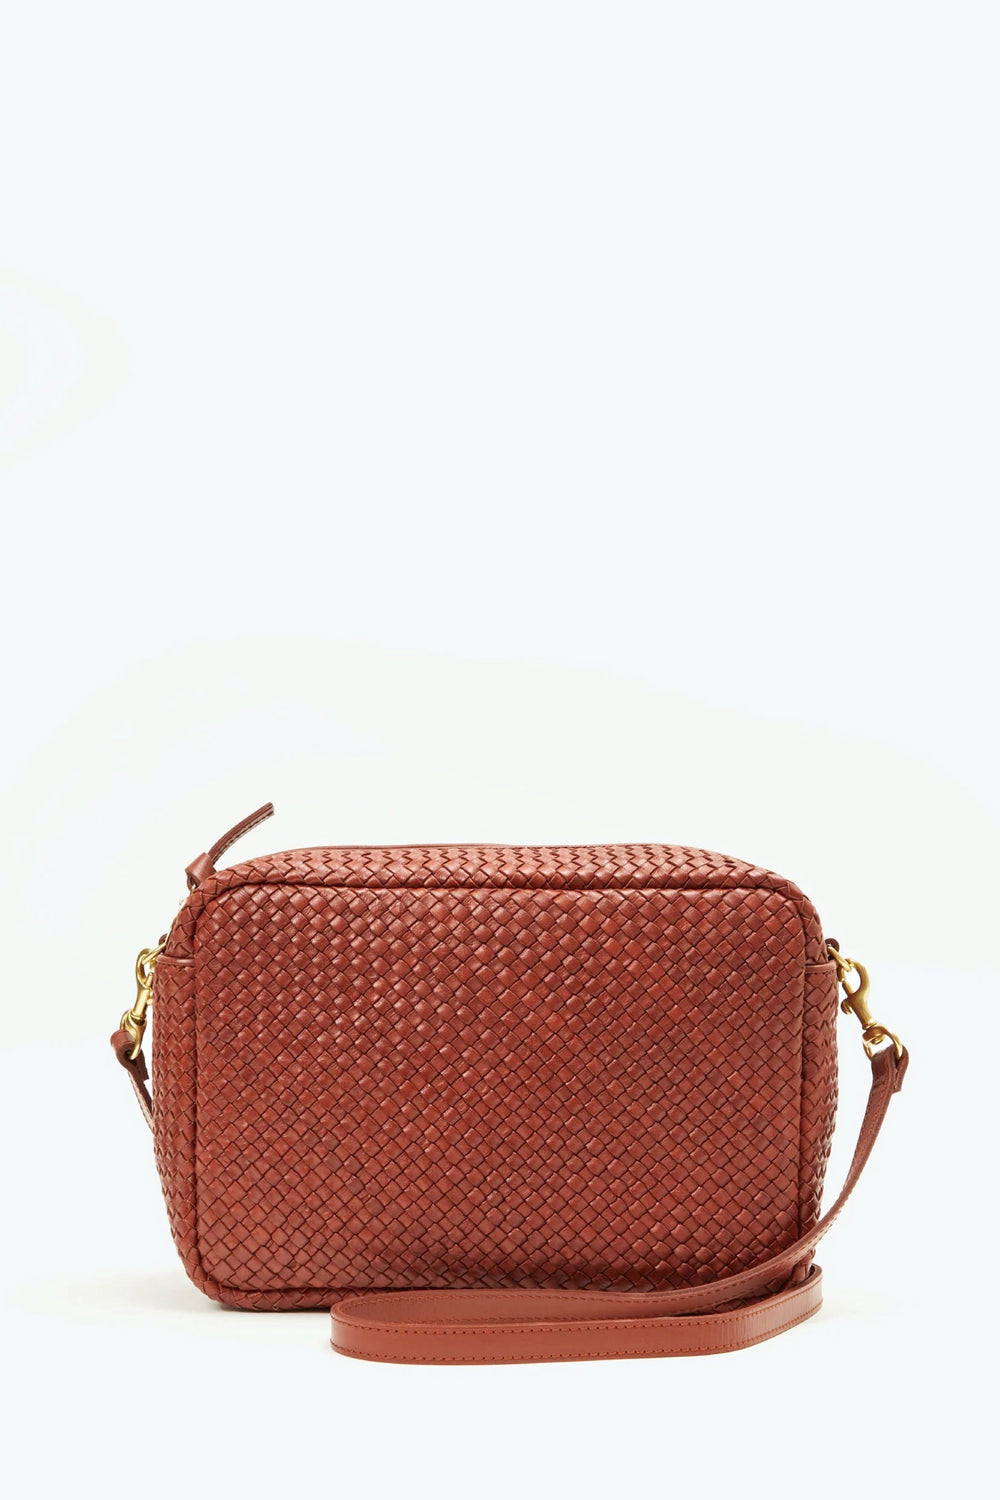 Toffee Woven Marisol Bag